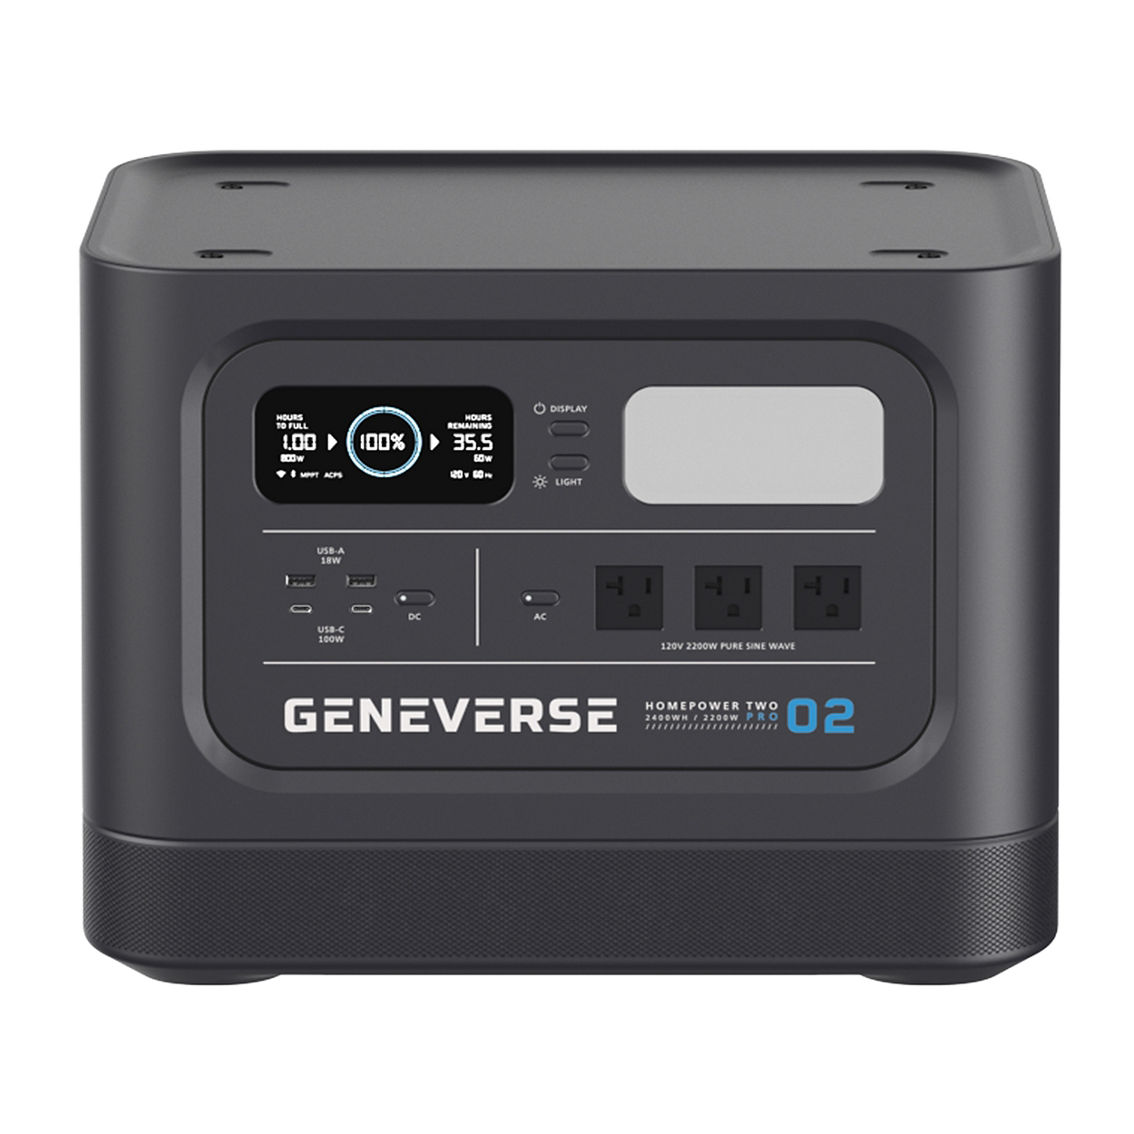 Geneverse HomePower Two Pro Solar Generator - Image 5 of 10